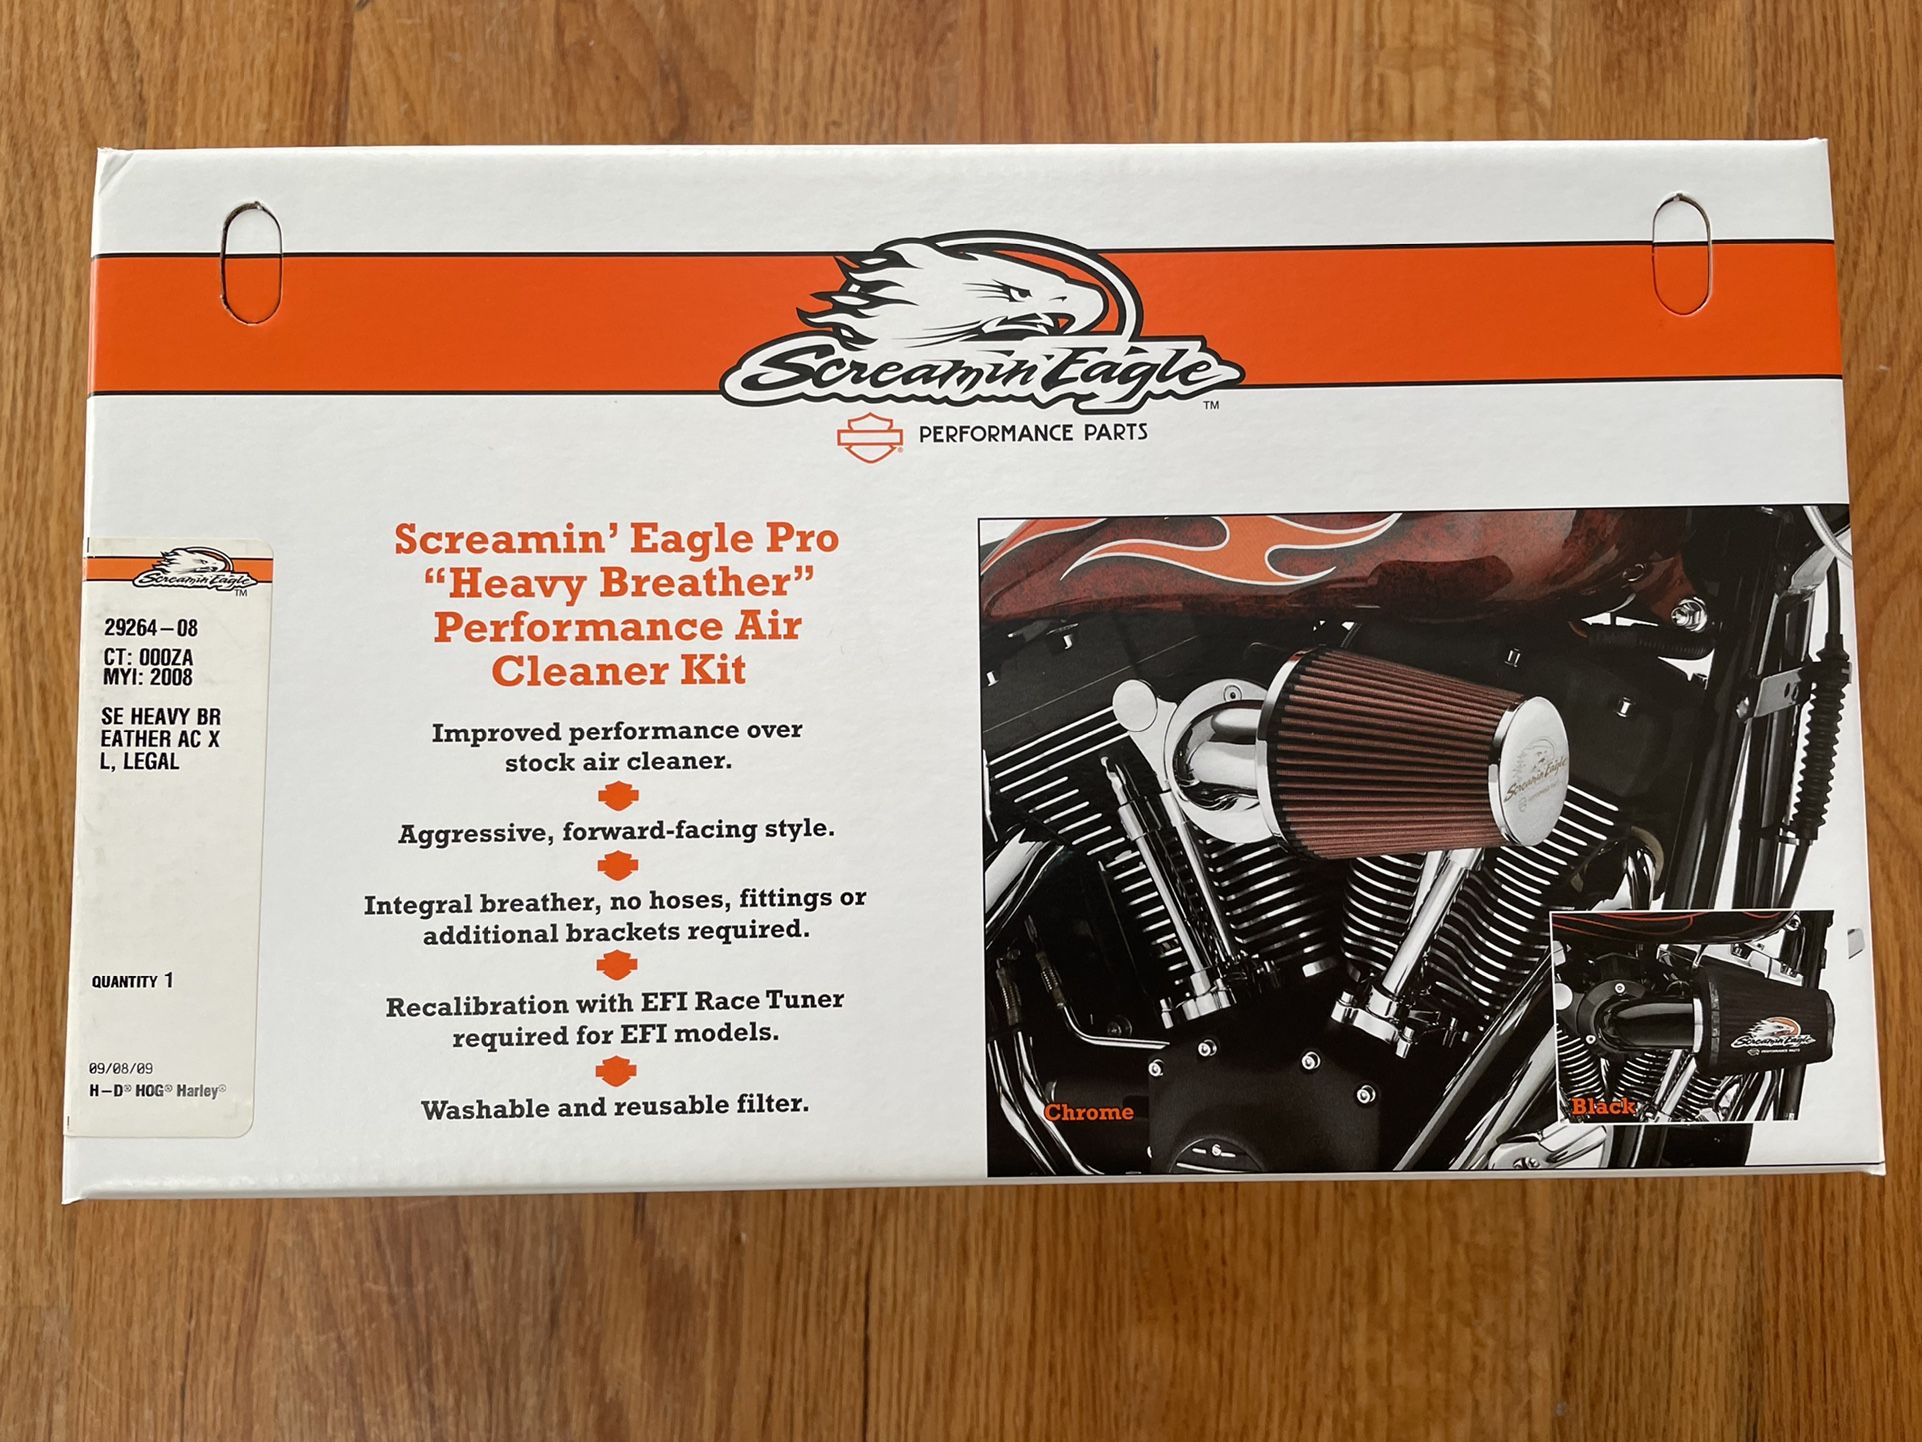 Genuine Screamin’ Eagle Street Legal “Heavy Breather” Performance Air Cleaner Kit (New in box)